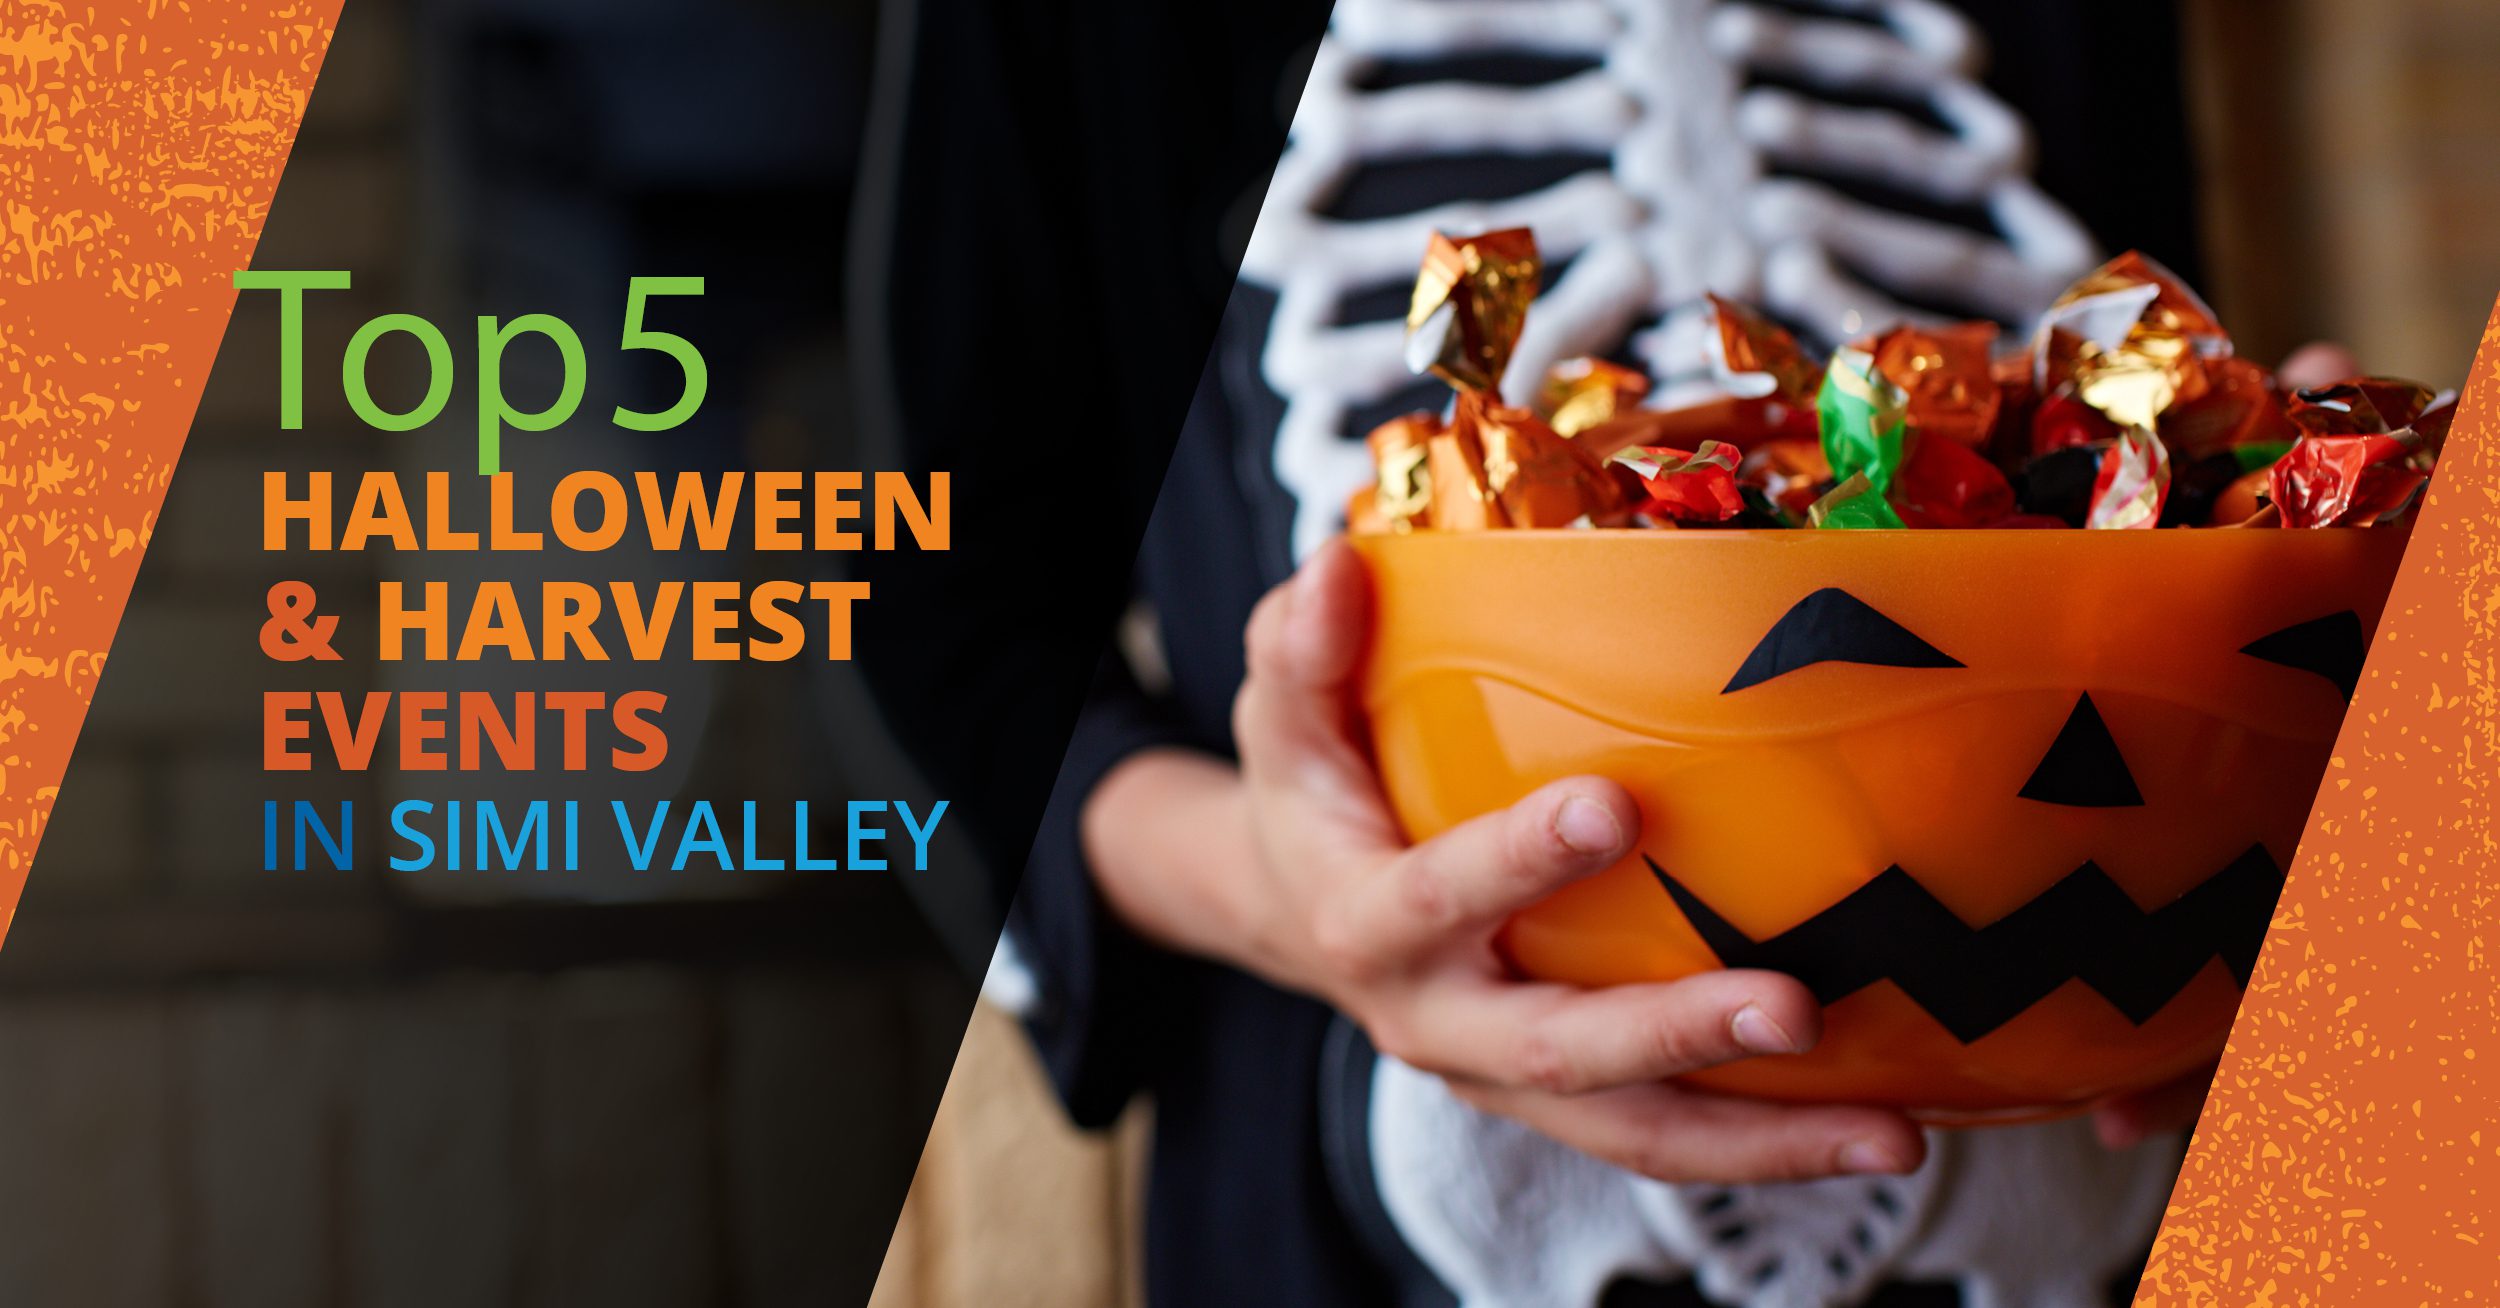 simi parks and rec halloween 2020 Top 5 Halloween And Harvest Events In Simi Valley Visit Simi Valley simi parks and rec halloween 2020